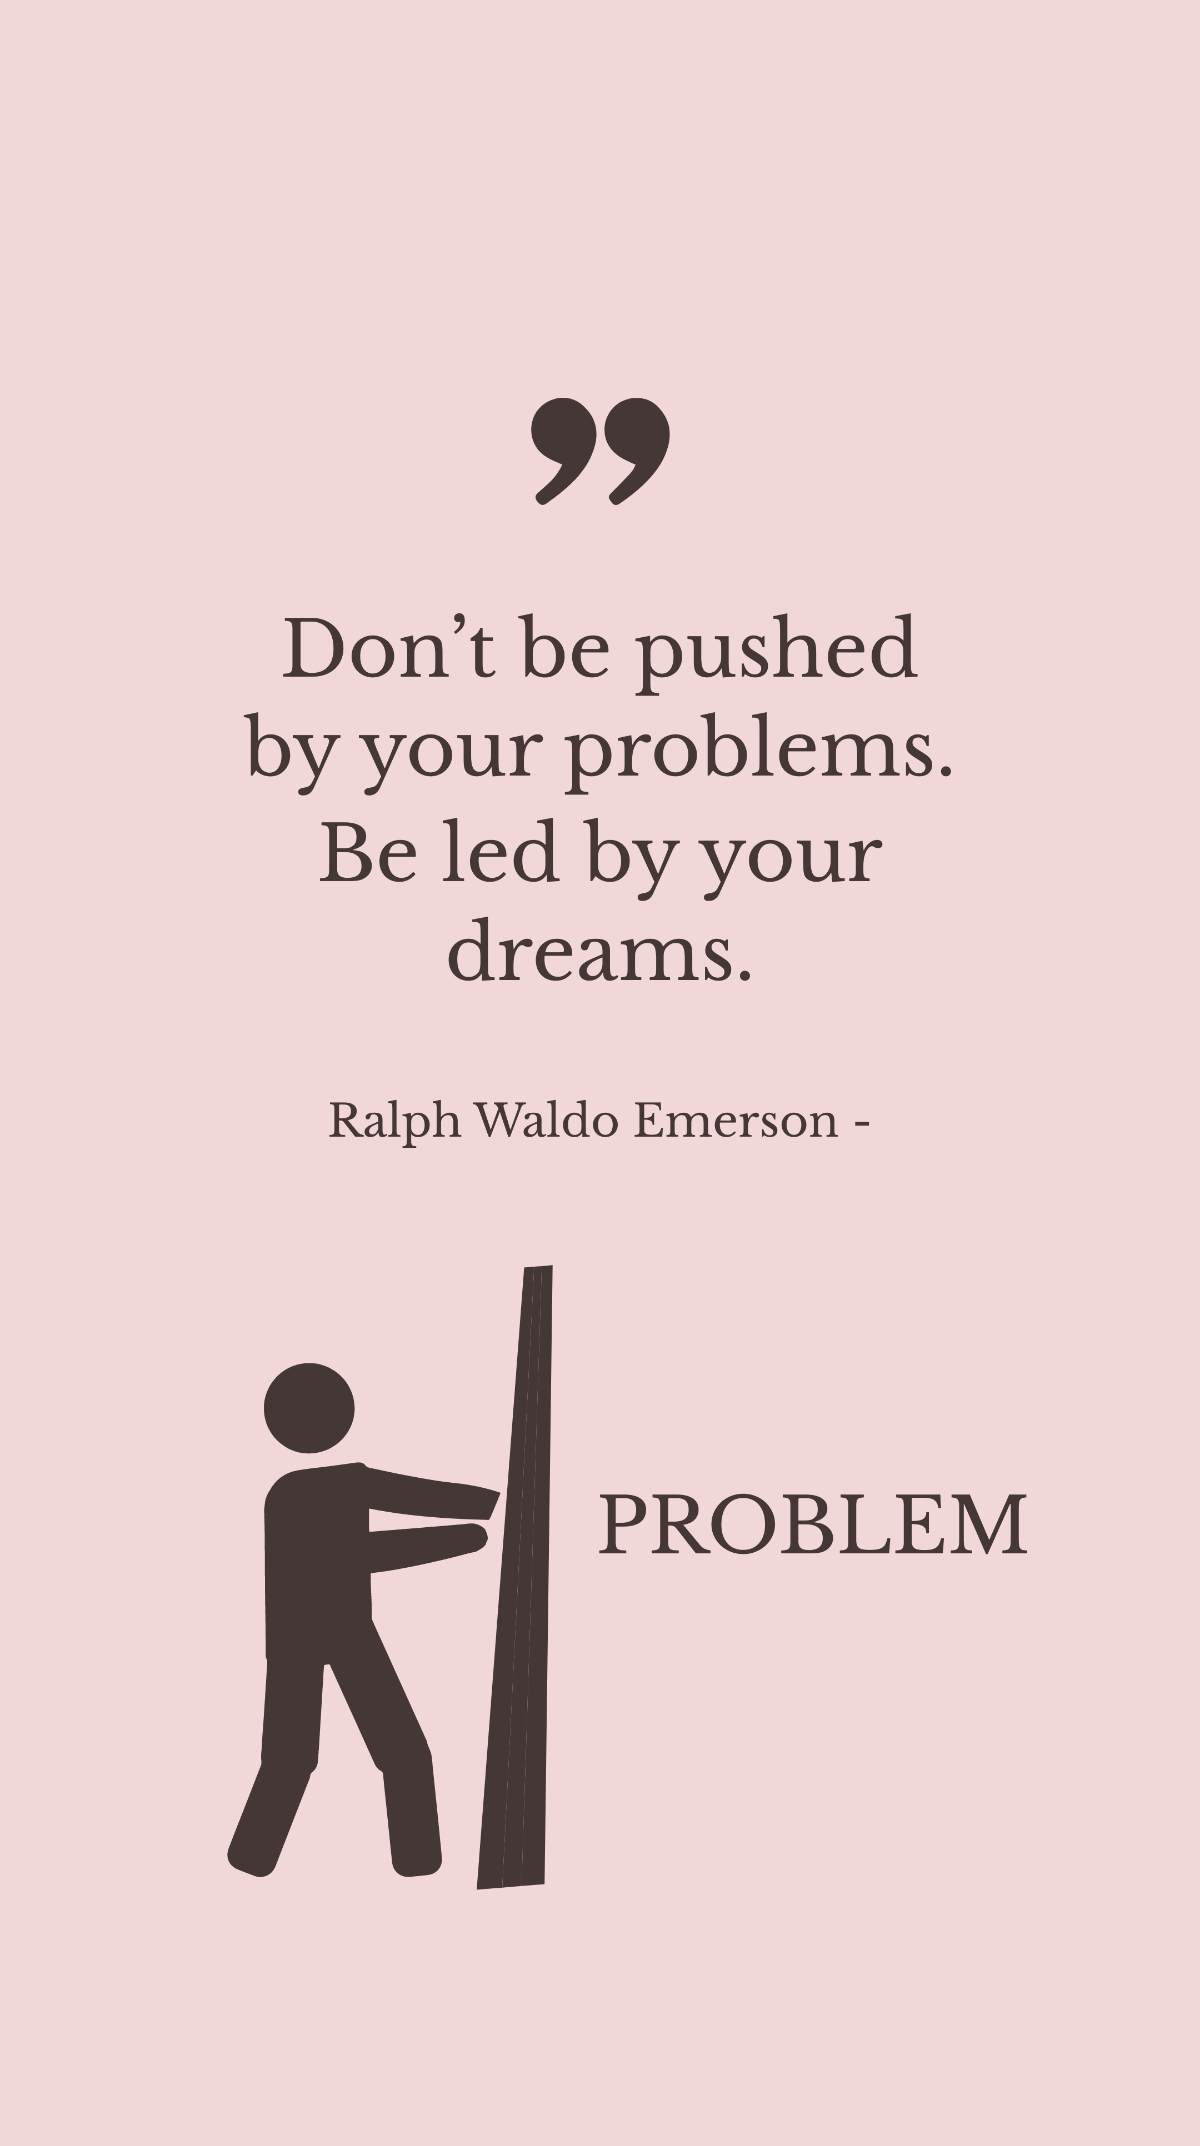 Ralph Waldo Emerson - Don’t be pushed by your problems. Be led by your dreams. Template